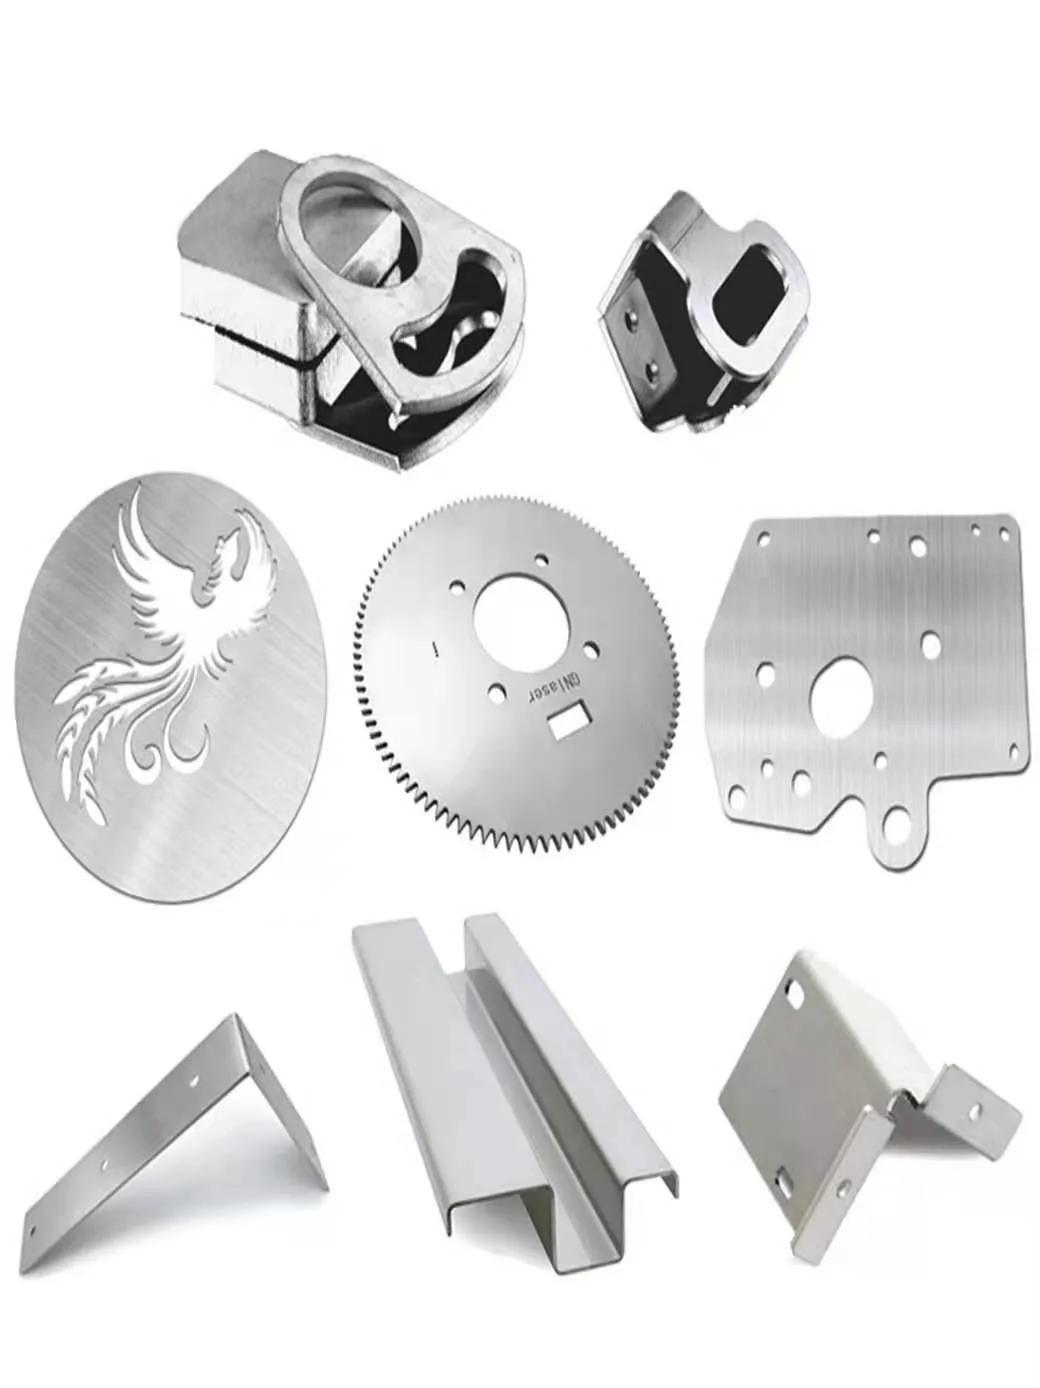 OEM CNC Machining Metal Injection Molding Parts Stainless Steel Turning Aluminum POM Glock Parts